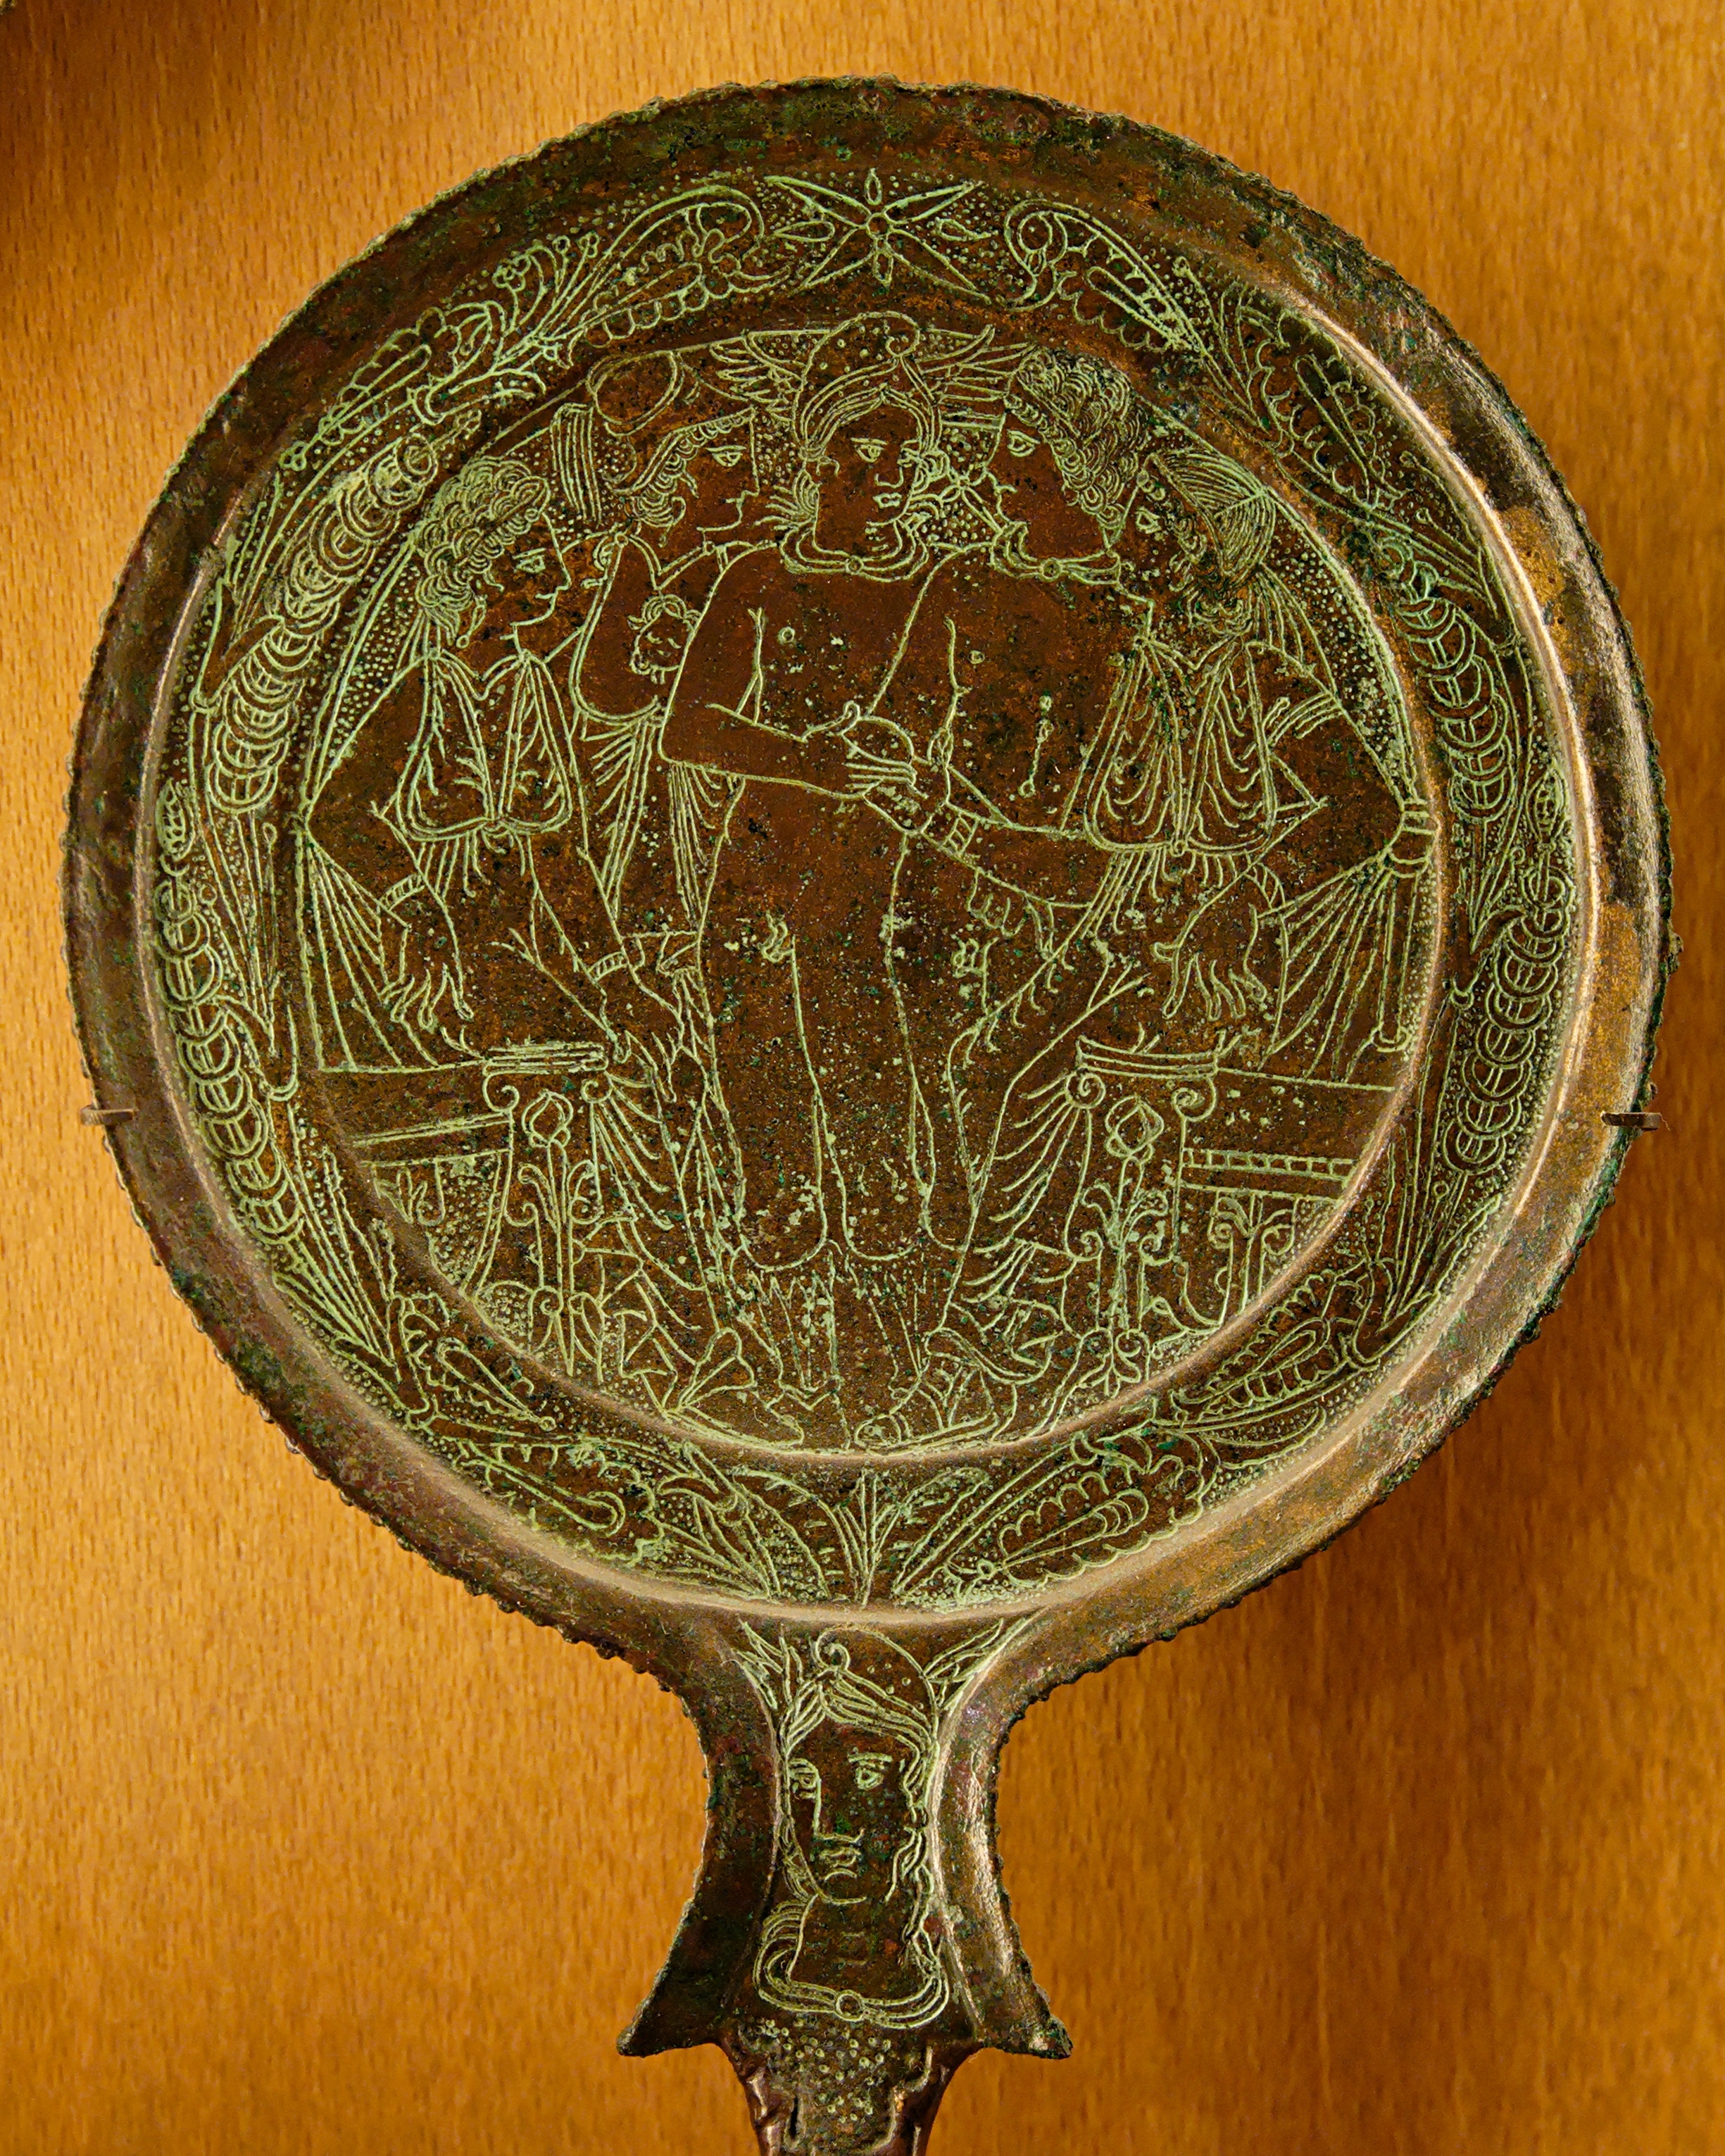 The mirror test appears to be an excellent test of animal intelligence in visually-dominated animals. Humans have appreciated mirrors for millennia, however. Shown here is ancient Etruscan mirror in the collection of the Lourve. Photo credit: Wikimedia/(C) Marie-Lan Nguyen/CC-BY-3